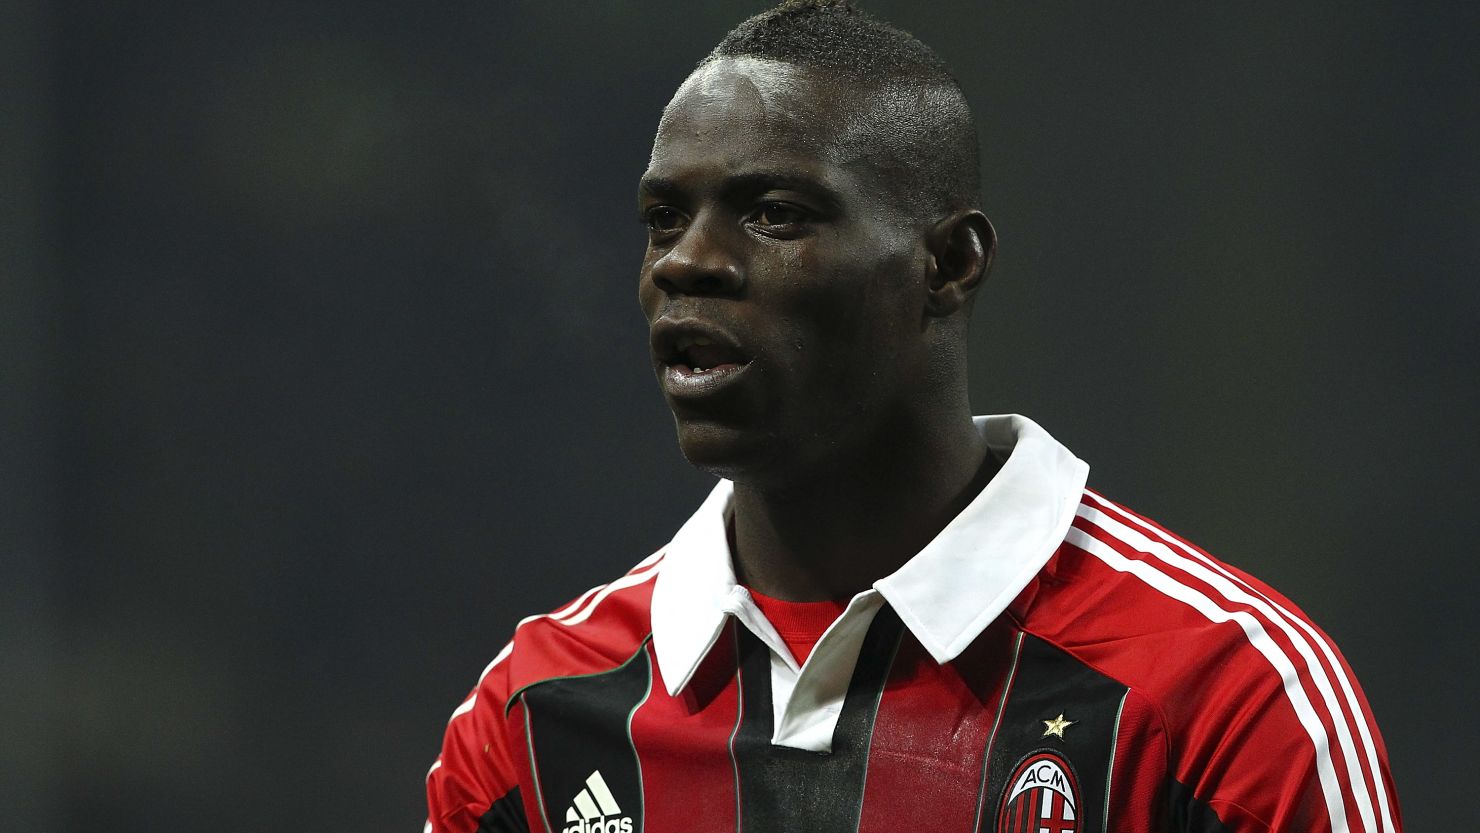 Mario Balotelli joined AC Milan from English champions Manchester City in January.